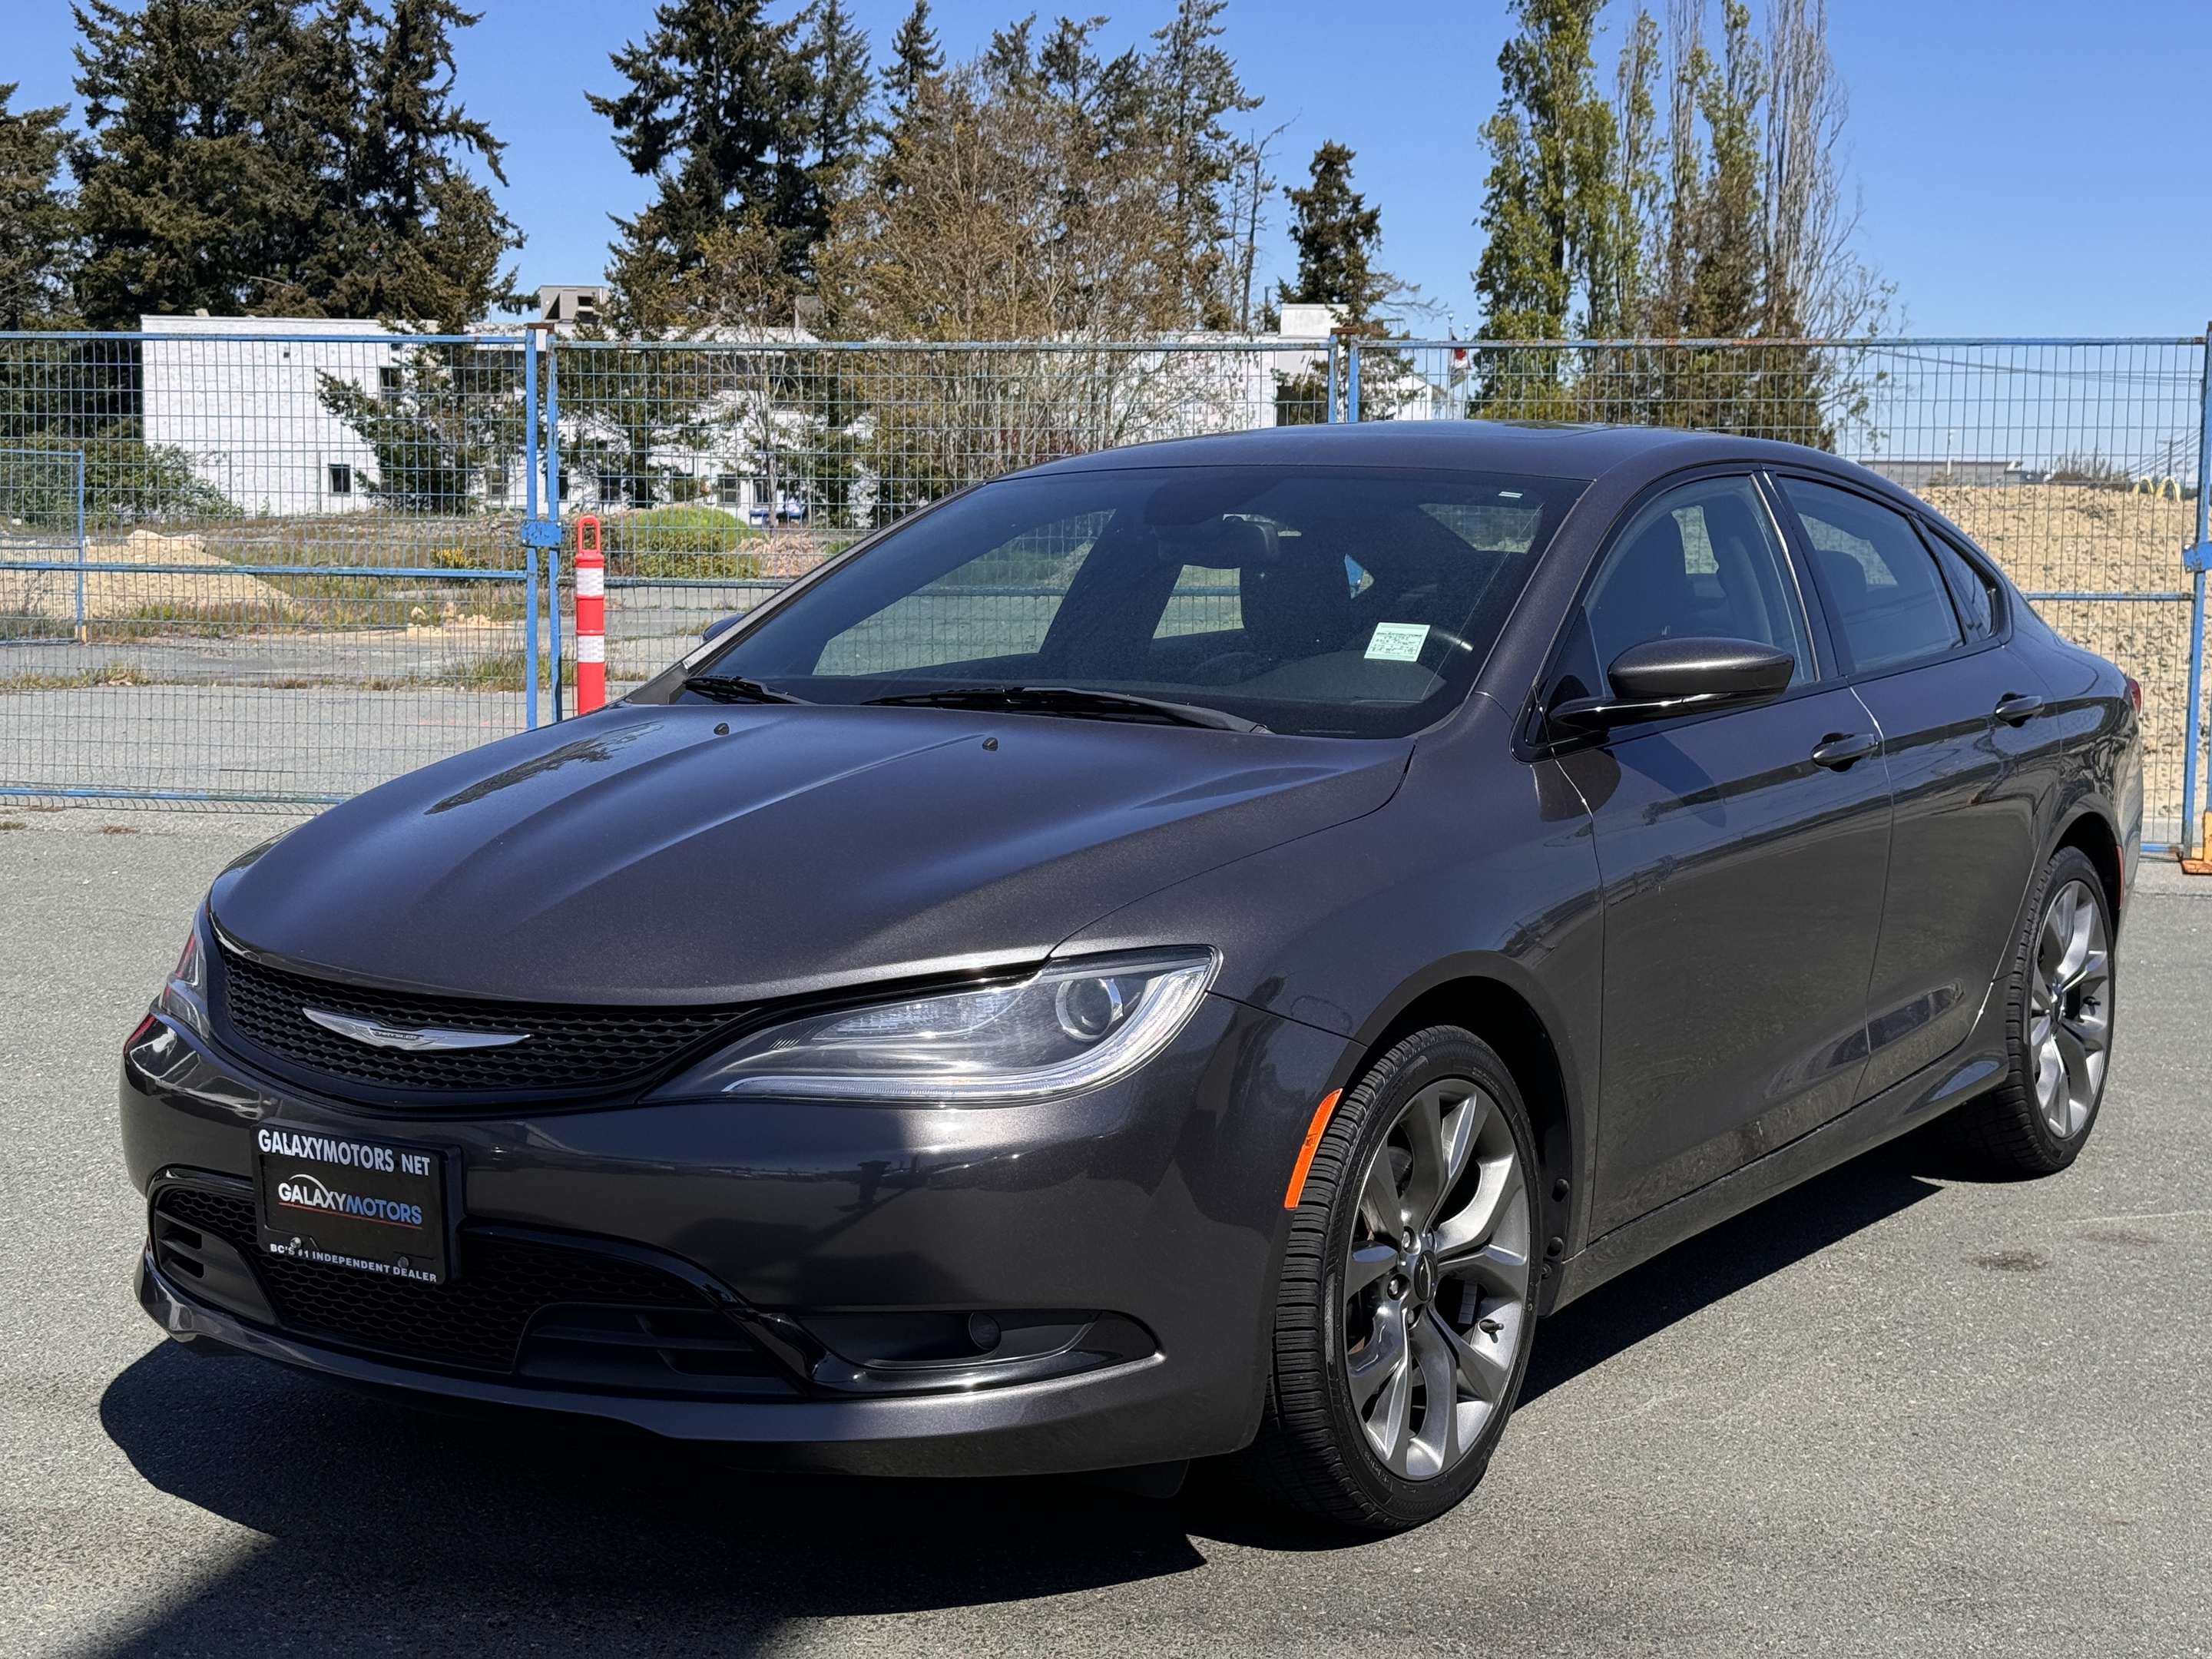 2016 Chrysler 200 S FWD-Pano Sunroof,GPS,Uconnect,Heated Seats,A/C